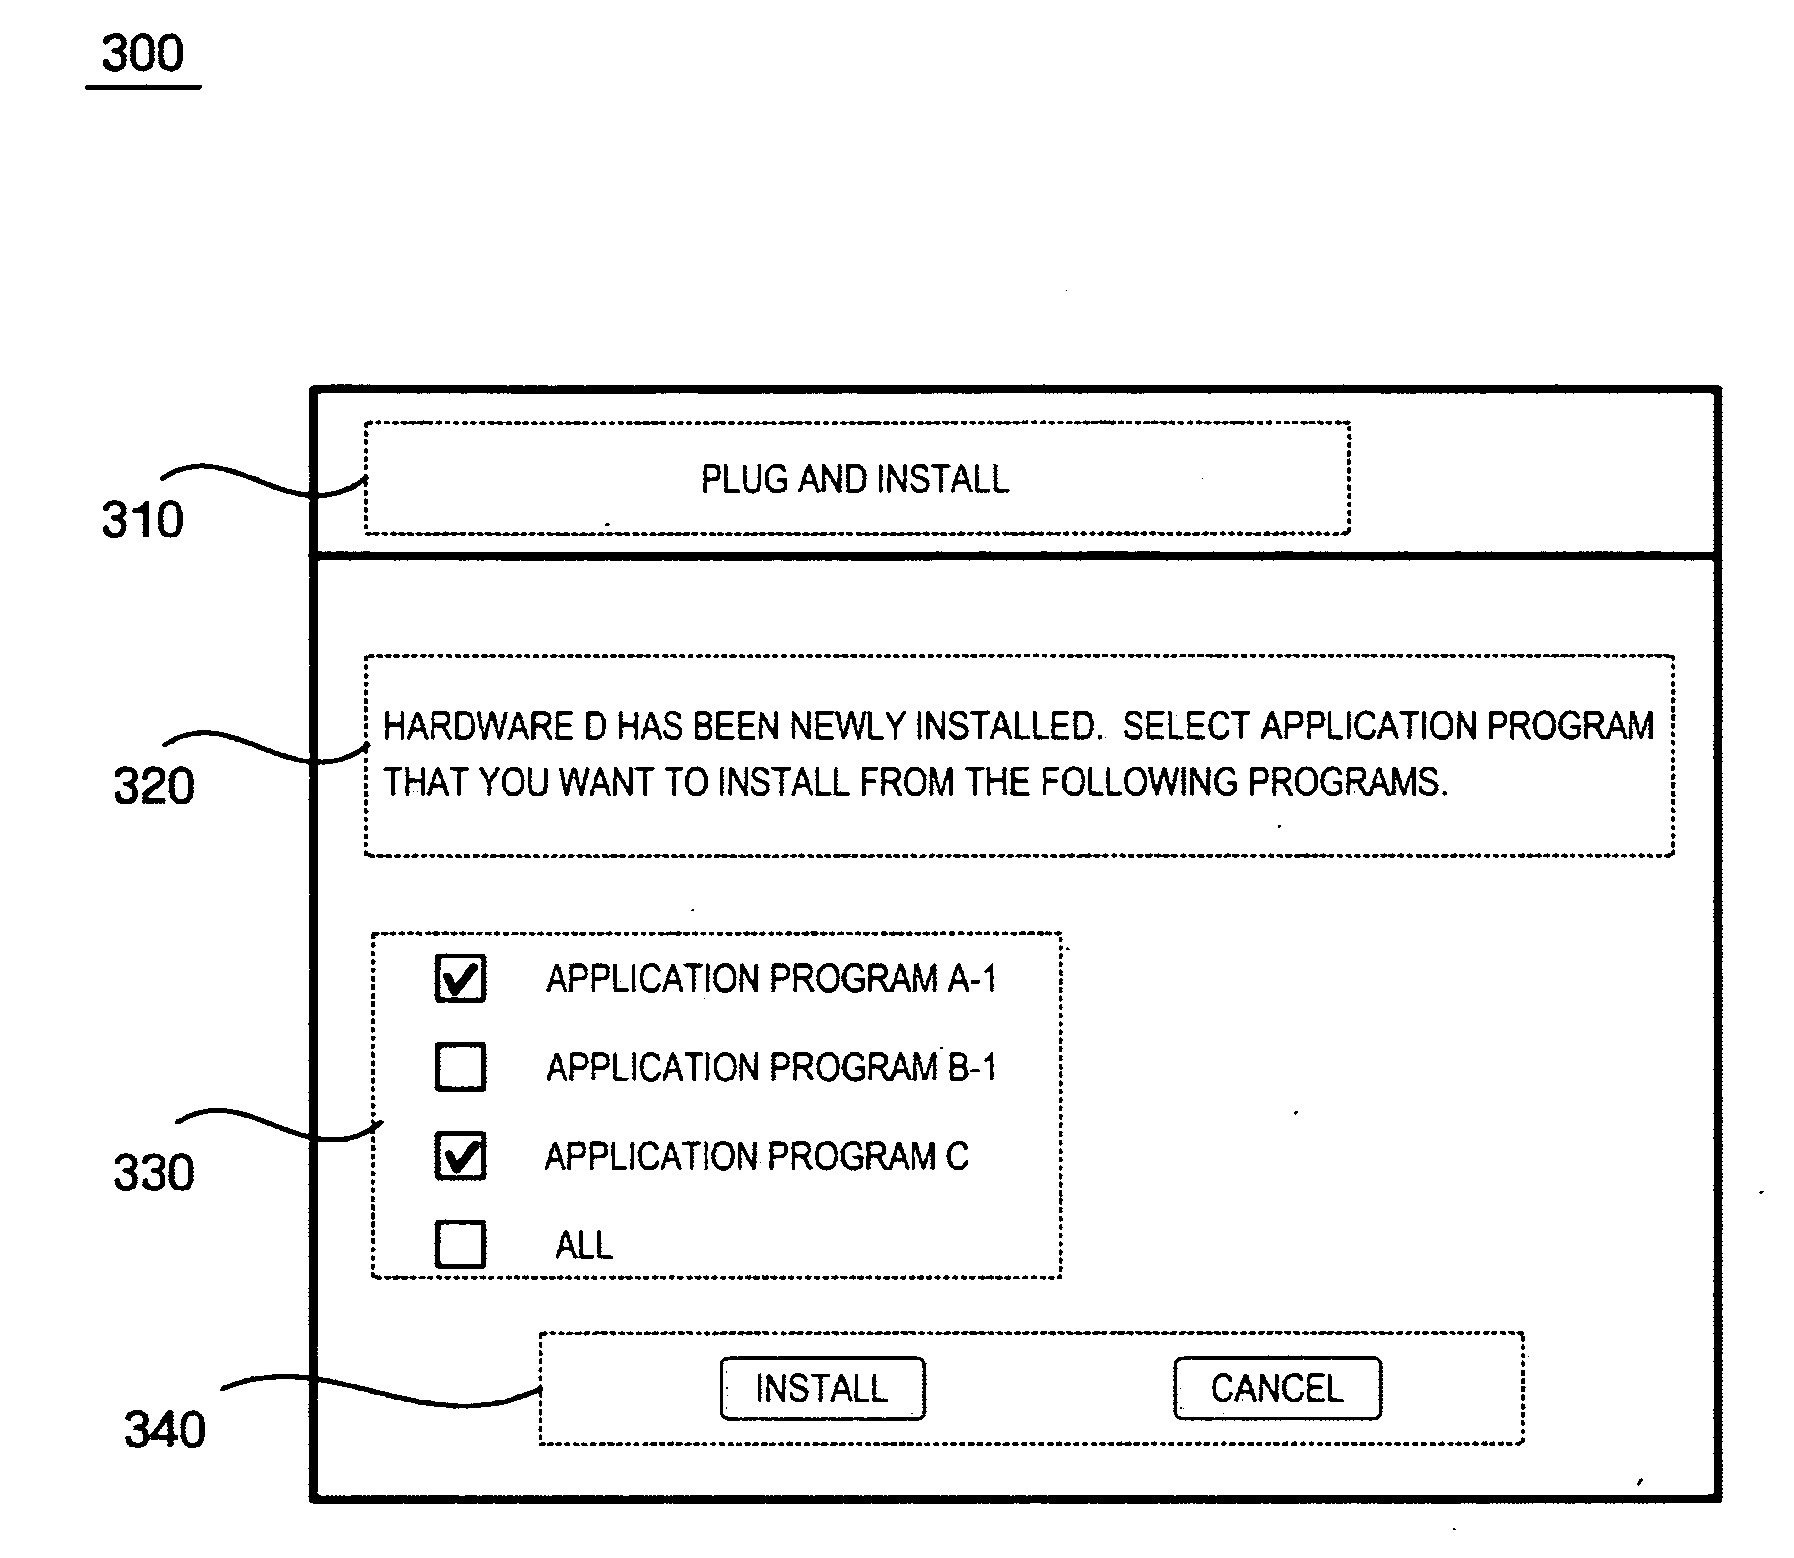 Plug and install system and method